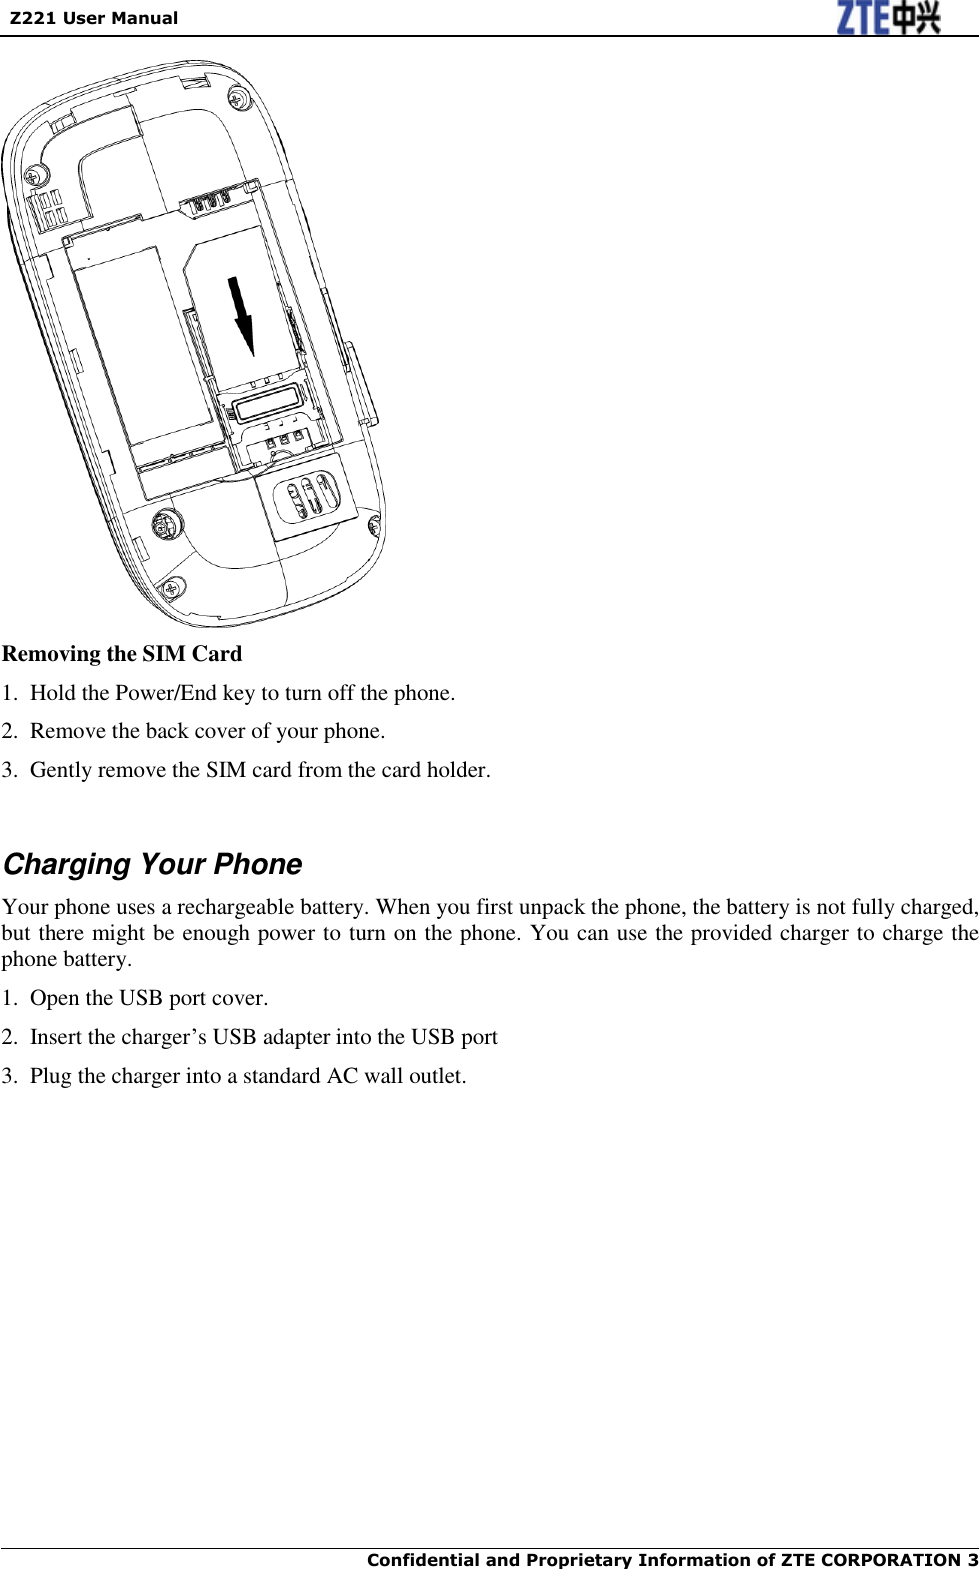   Z221 User Manual  Confidential and Proprietary Information of ZTE CORPORATION 3     Removing the SIM Card 1.  Hold the Power/End key to turn off the phone. 2.  Remove the back cover of your phone. 3.  Gently remove the SIM card from the card holder.  Charging Your Phone Your phone uses a rechargeable battery. When you first unpack the phone, the battery is not fully charged, but there might be enough power to turn on the phone. You can use the provided charger to charge the phone battery. 1.  Open the USB port cover. 2.  Insert the charger‟s USB adapter into the USB port 3.  Plug the charger into a standard AC wall outlet. 